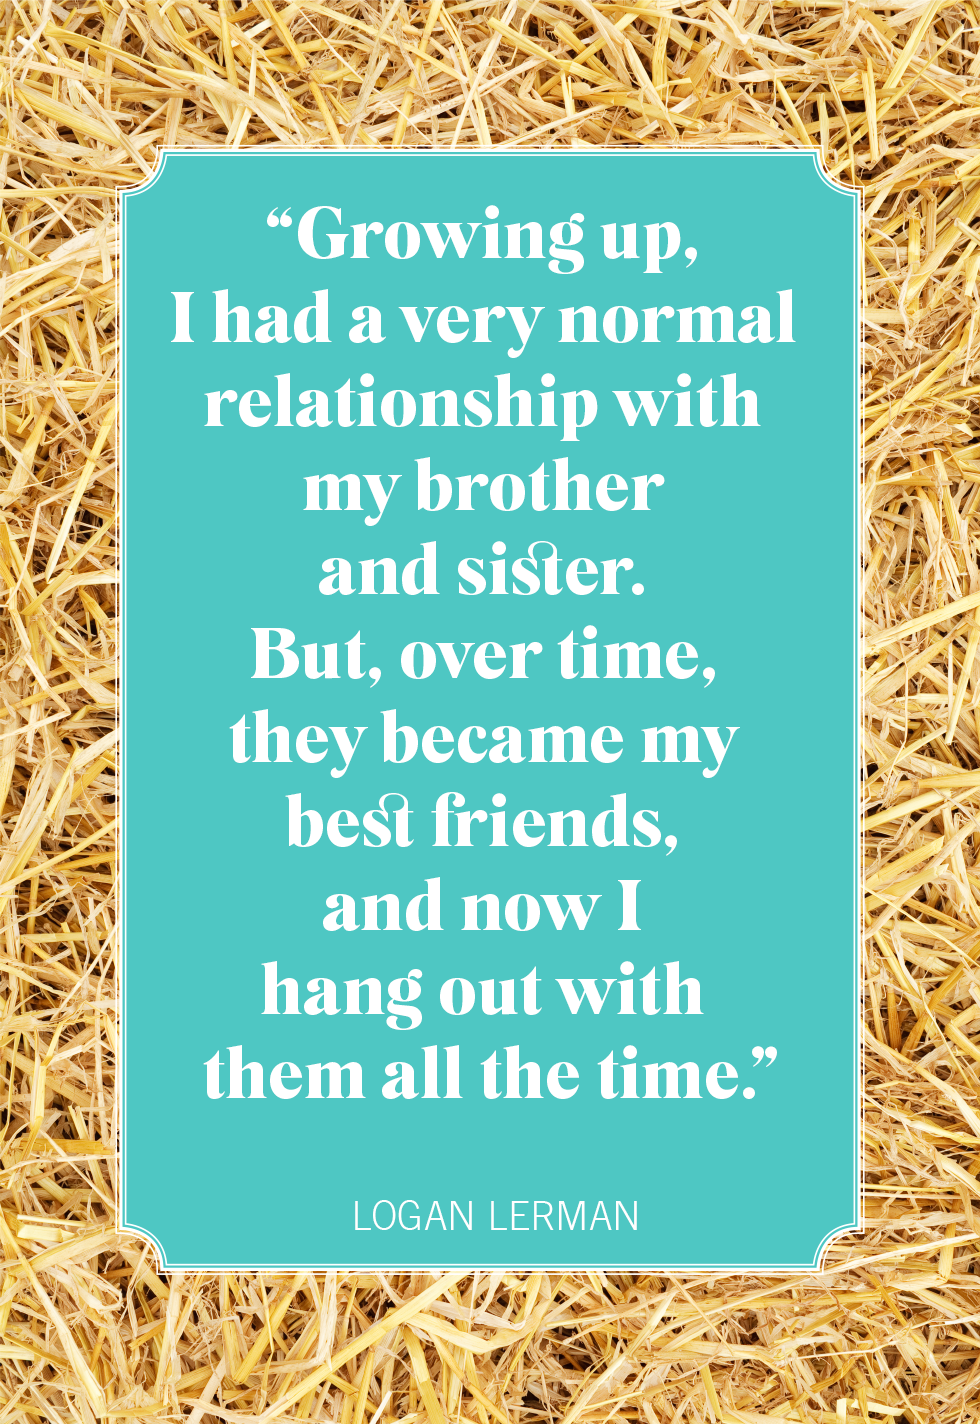 Sisters: Perfect Best Friend, Friendship Cards & Quotes